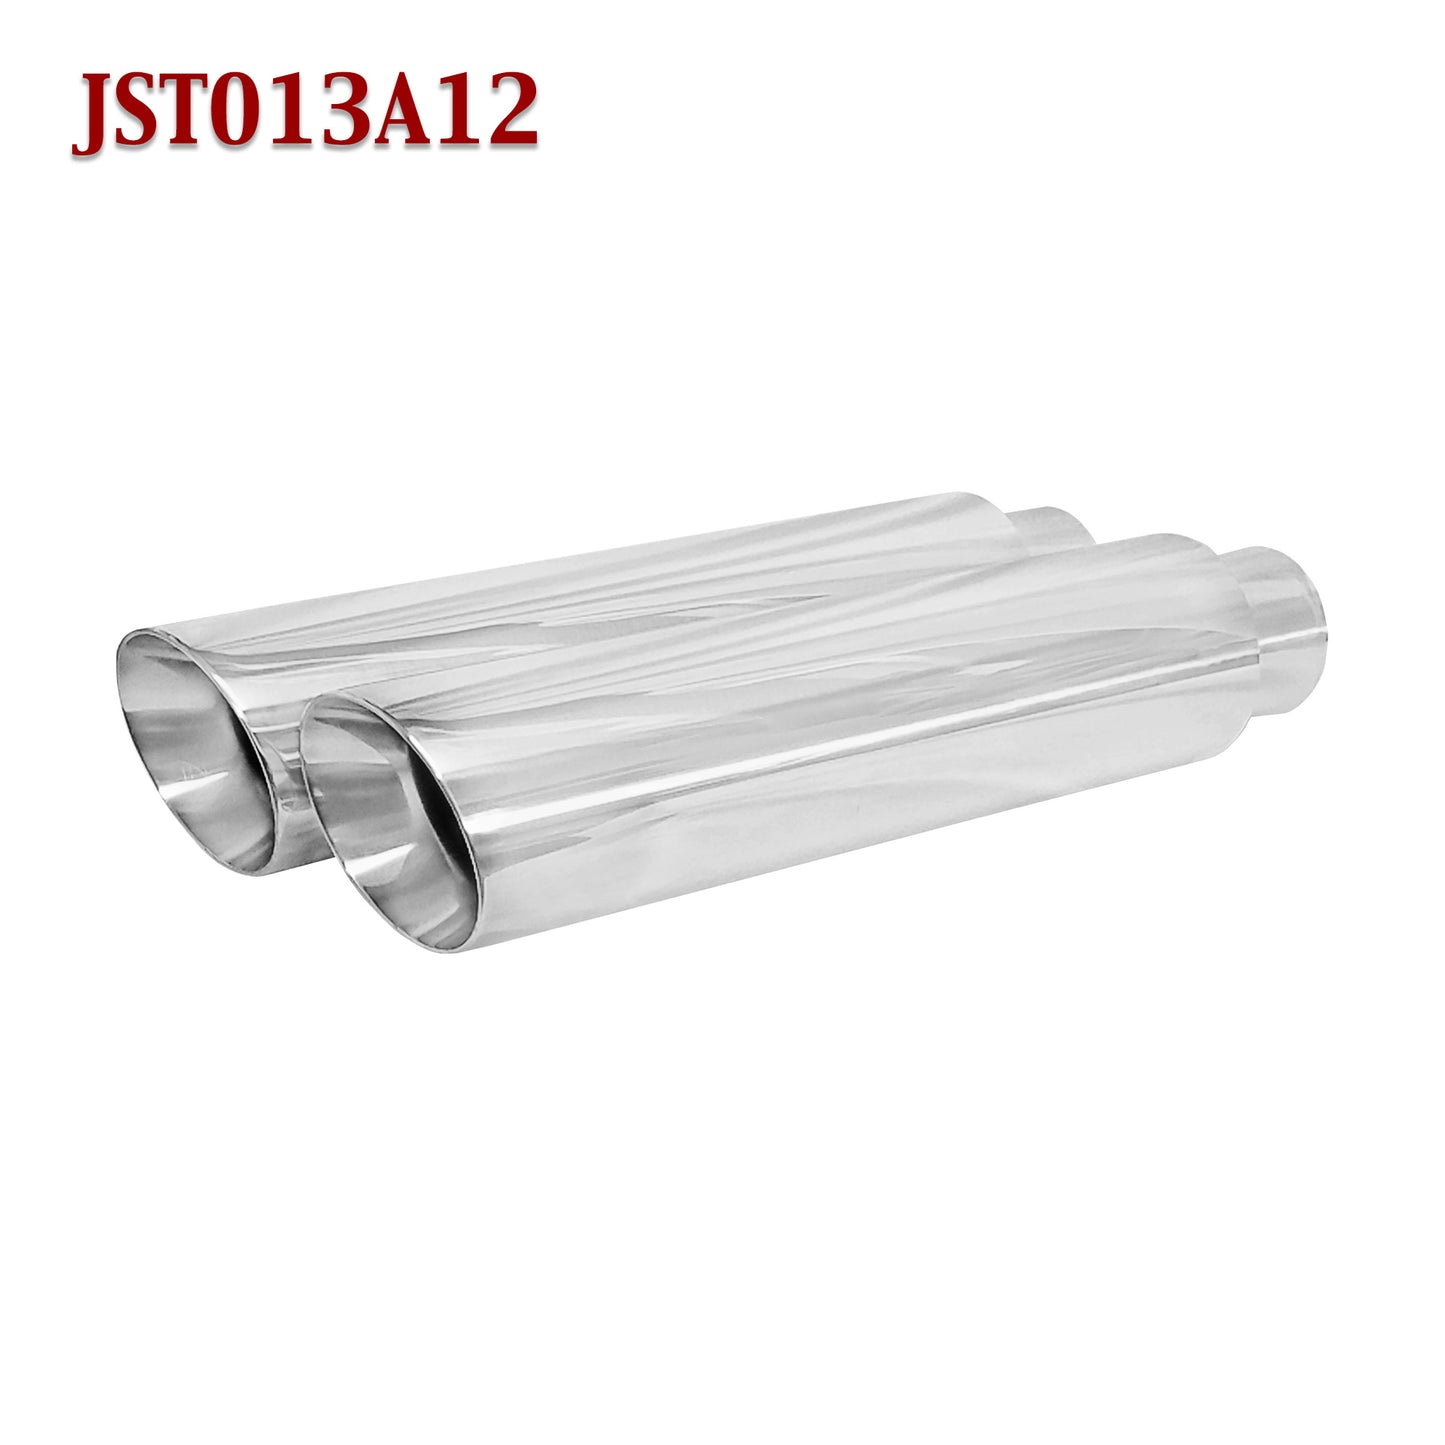 JST013A12 2.25" Stainless Round Truck Exhaust Tip 2 1/4" Inlet / 3" Outlet / 12" Long